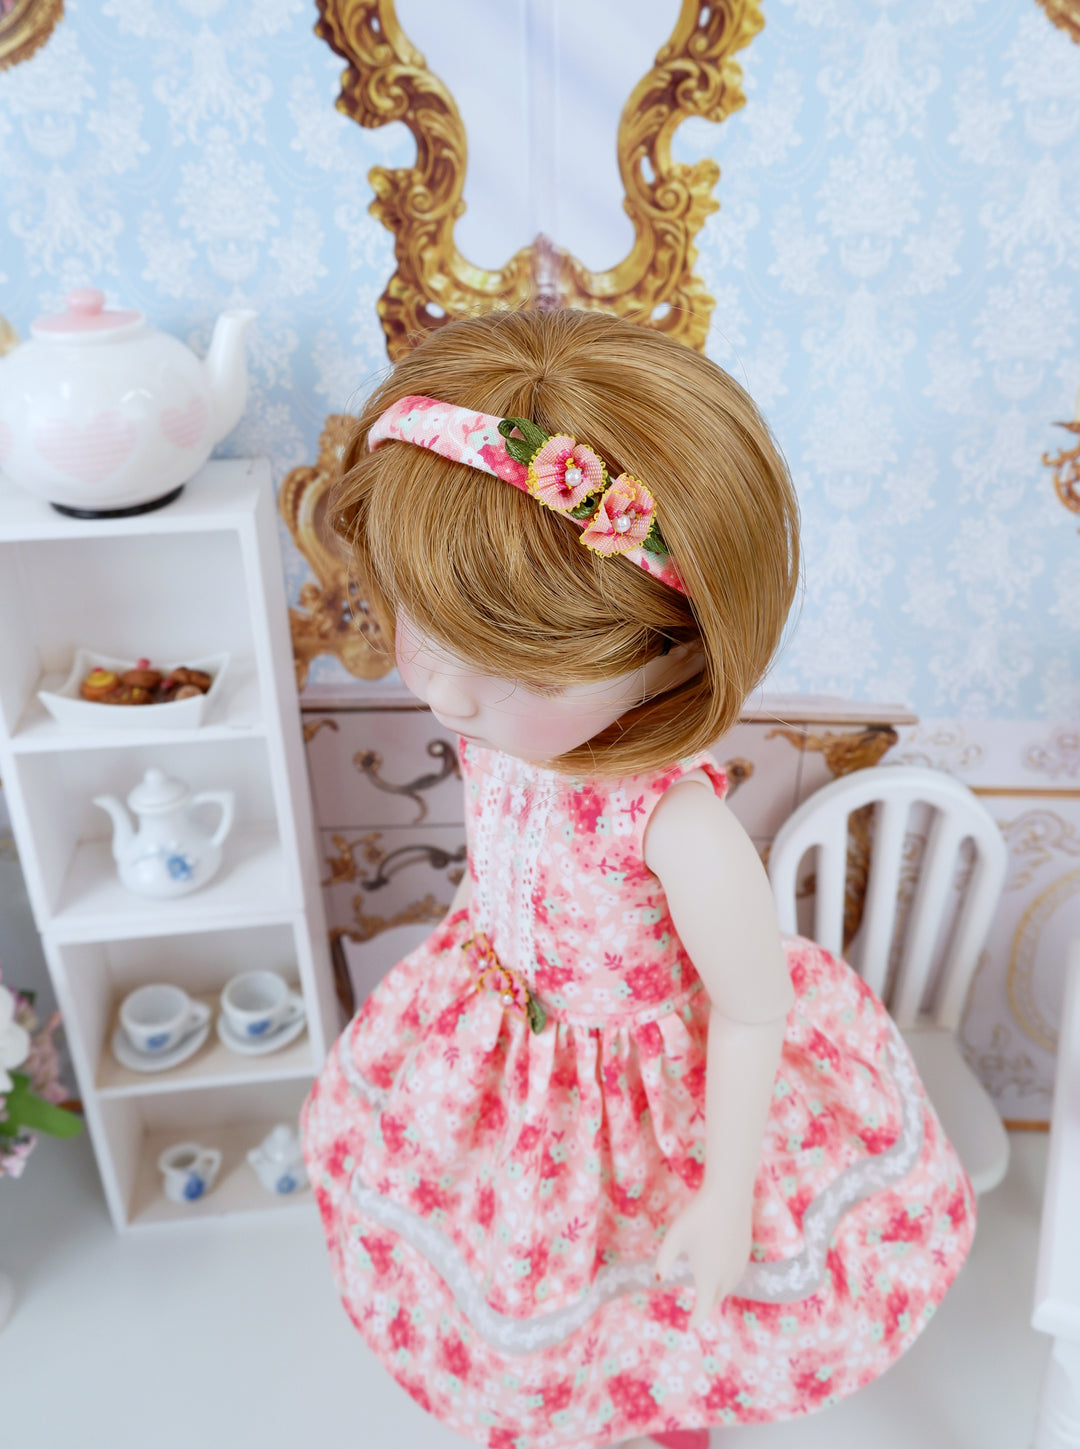 Sunny Posies - dress with shoes for Ruby Red Fashion Friends doll